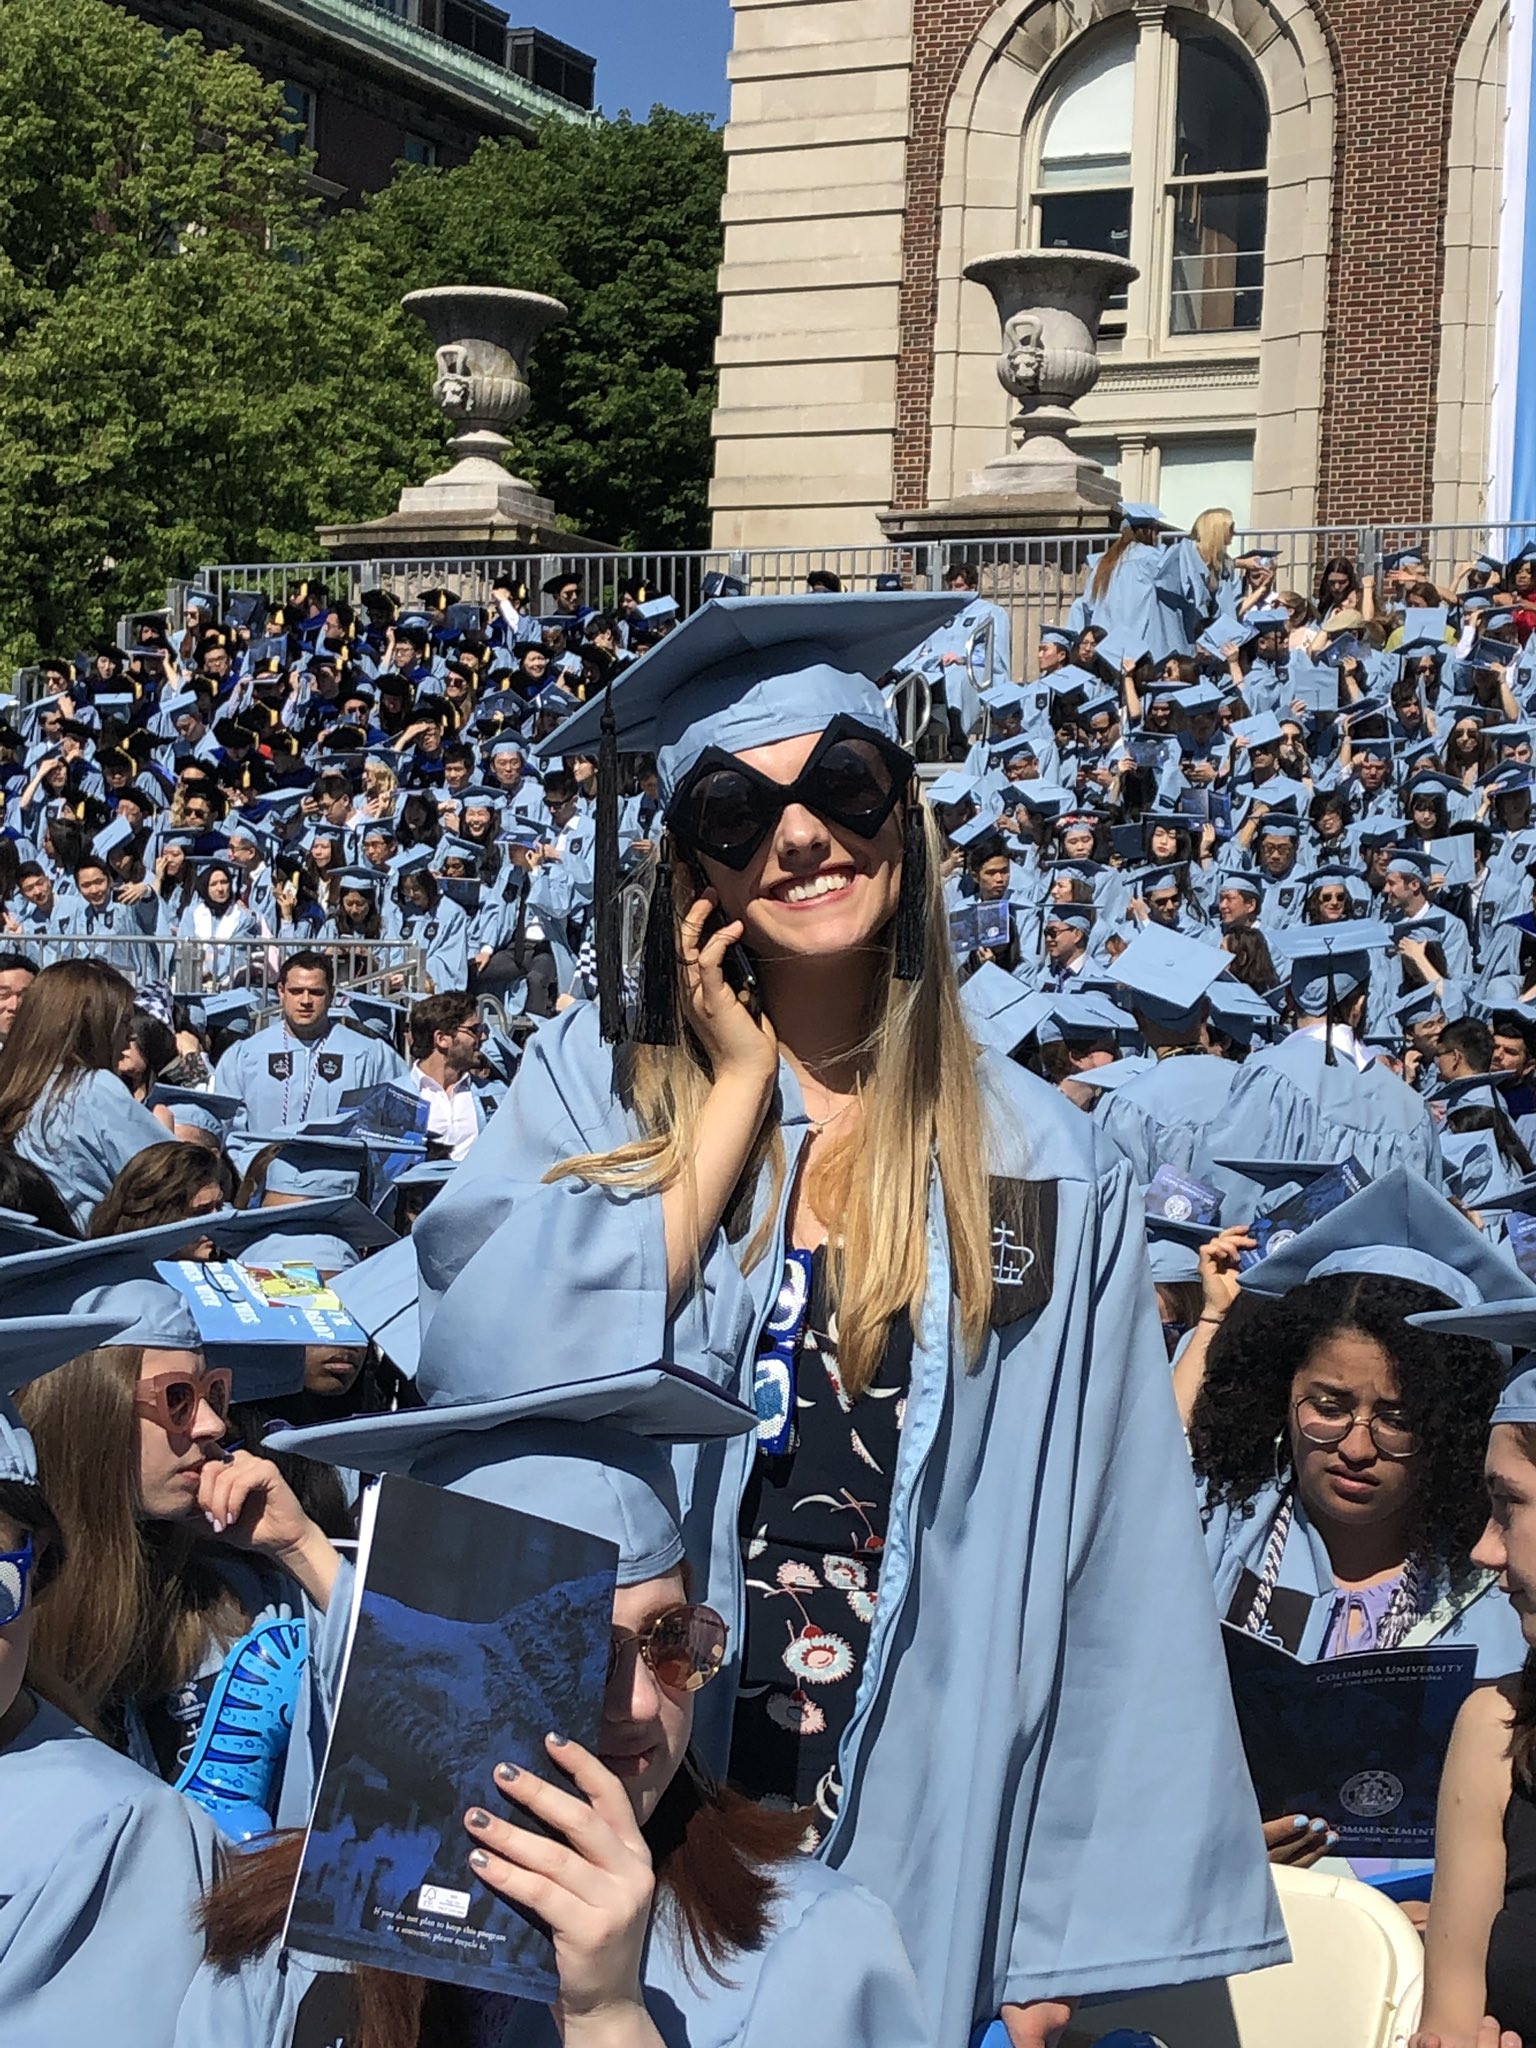 Columbia University on Twitter: "It's happening! TUNE IN to Columbia's  265th Commencement at https://t.co/fSIgpQPm84 https://t.co/Rzj0V1Uu4B" /  Twitter